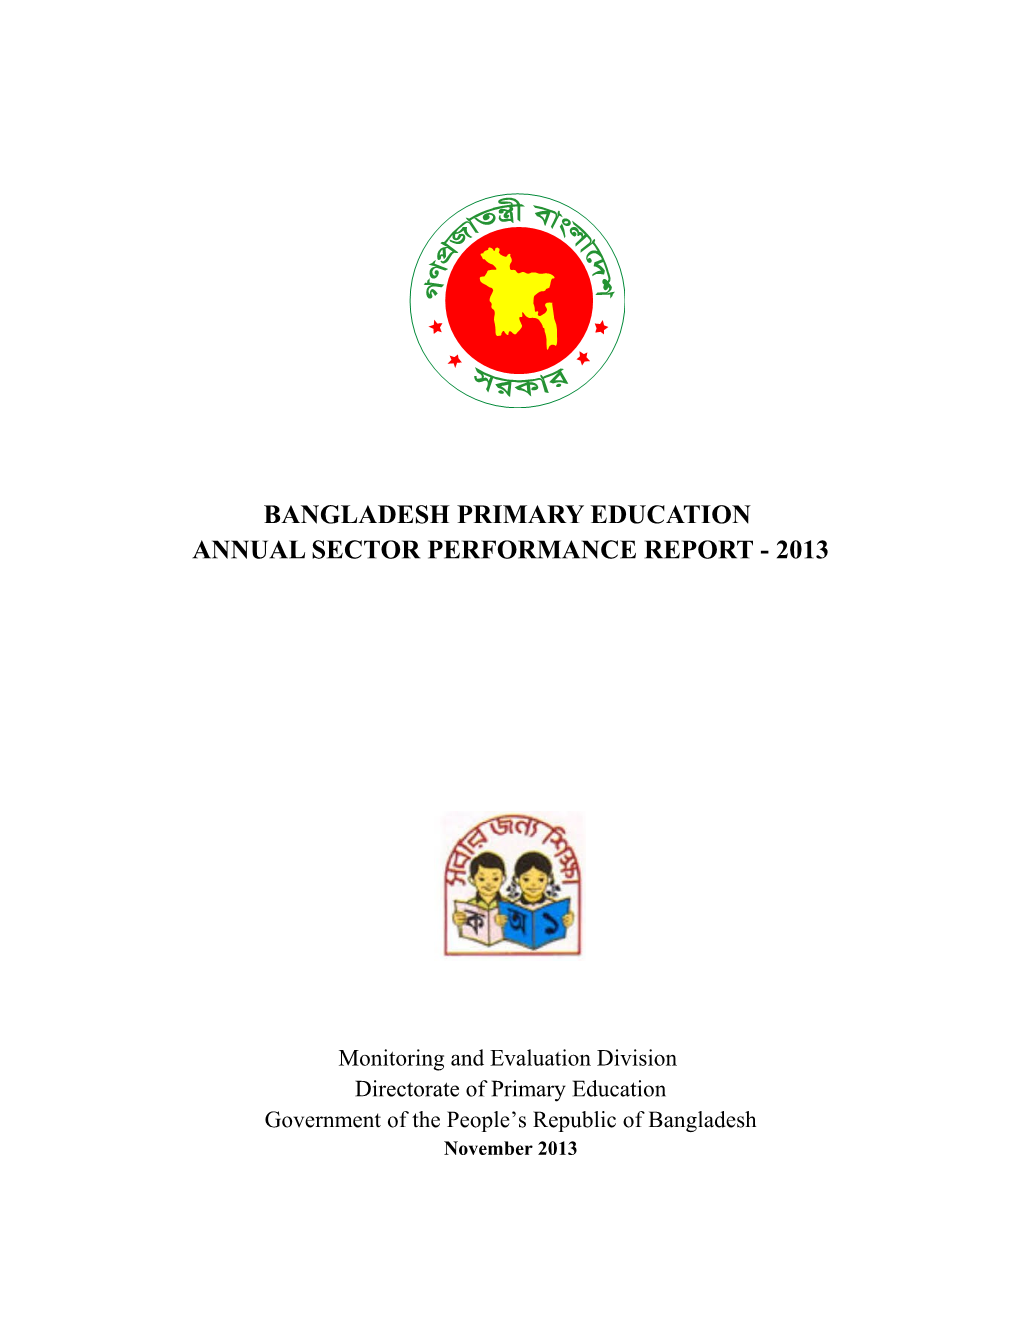 Bangladesh Primary Education Annual Sector Performance Report - 2013